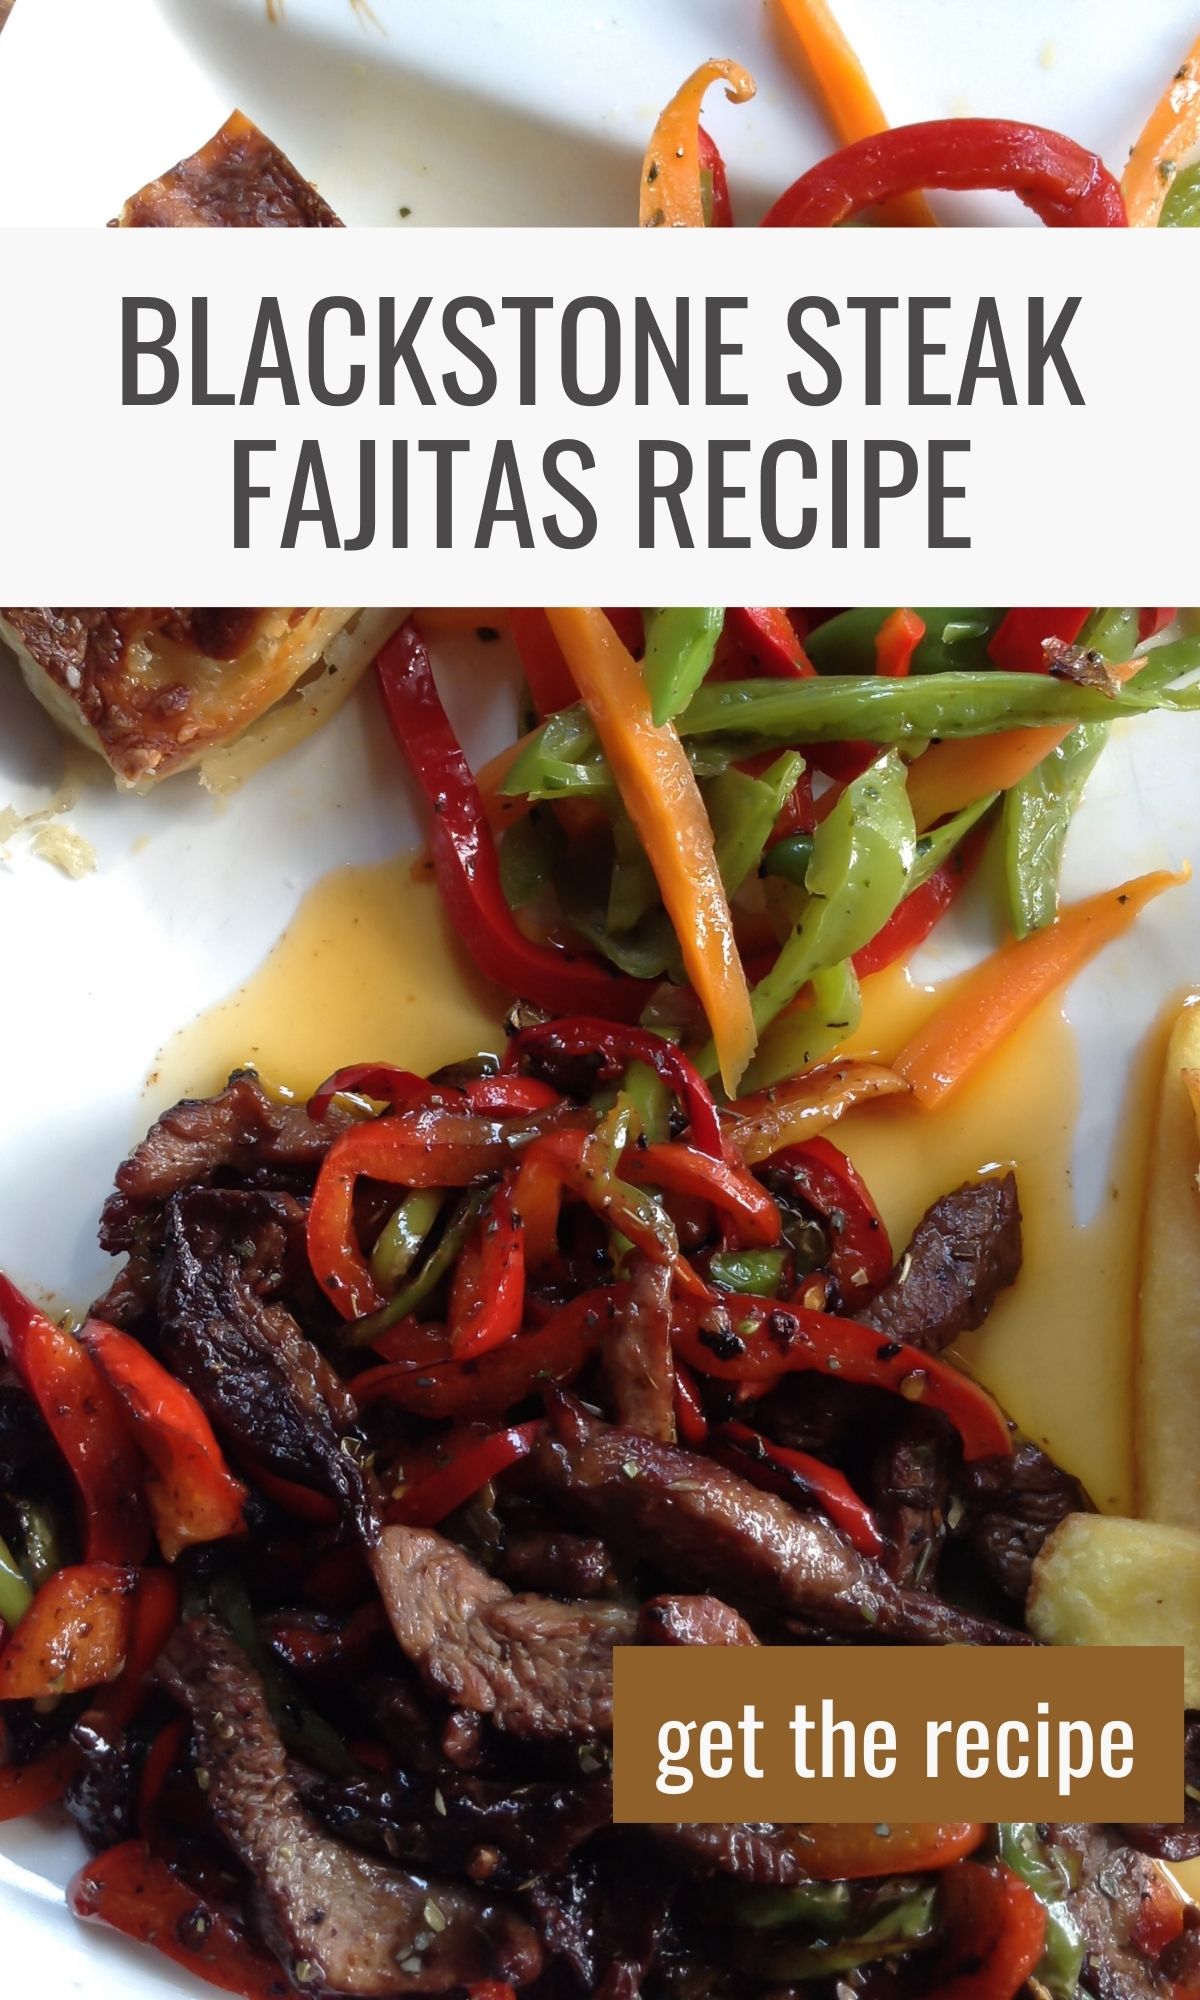 A plate of steak fajitas with sautéed bell peppers, onions, and a text overlay that says "blackstone steak fajitas recipe, get the recipe.